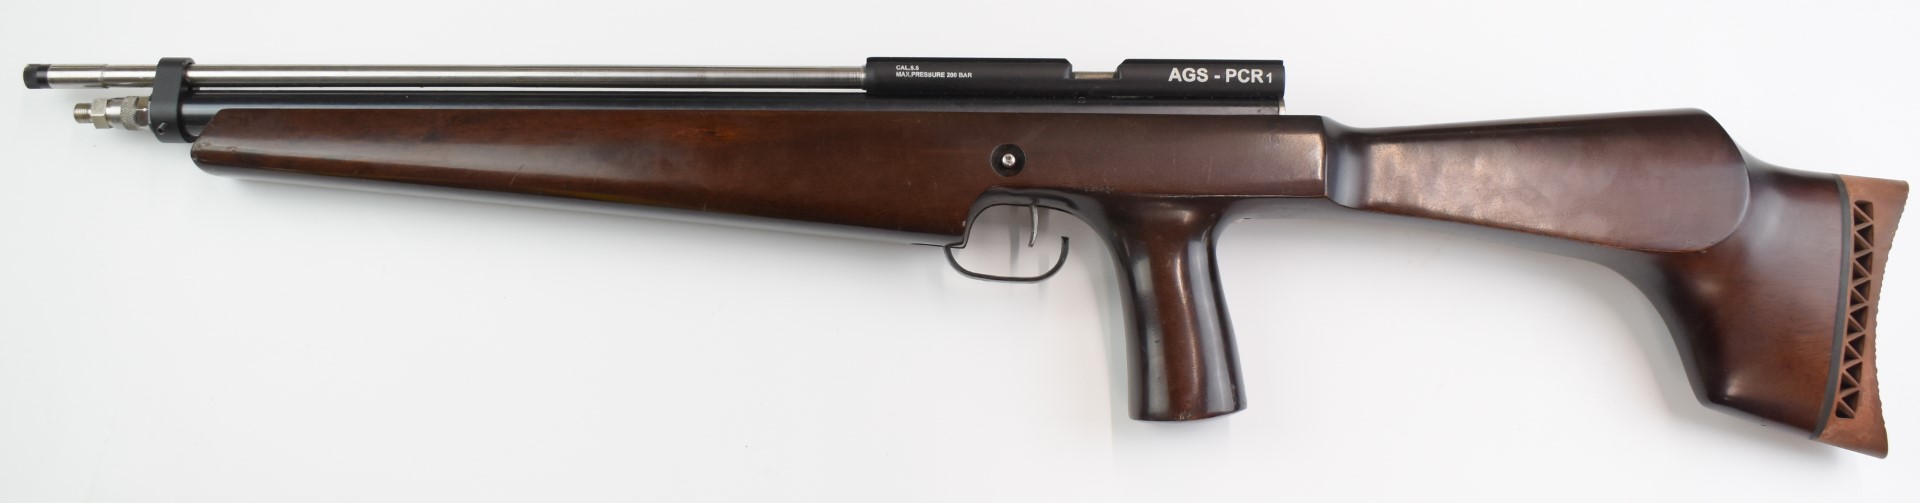 AGS-PCR1 .22 PCP bolt-action air rifle with pistol grip and adjustable trigger, serial number 00911. - Image 6 of 9